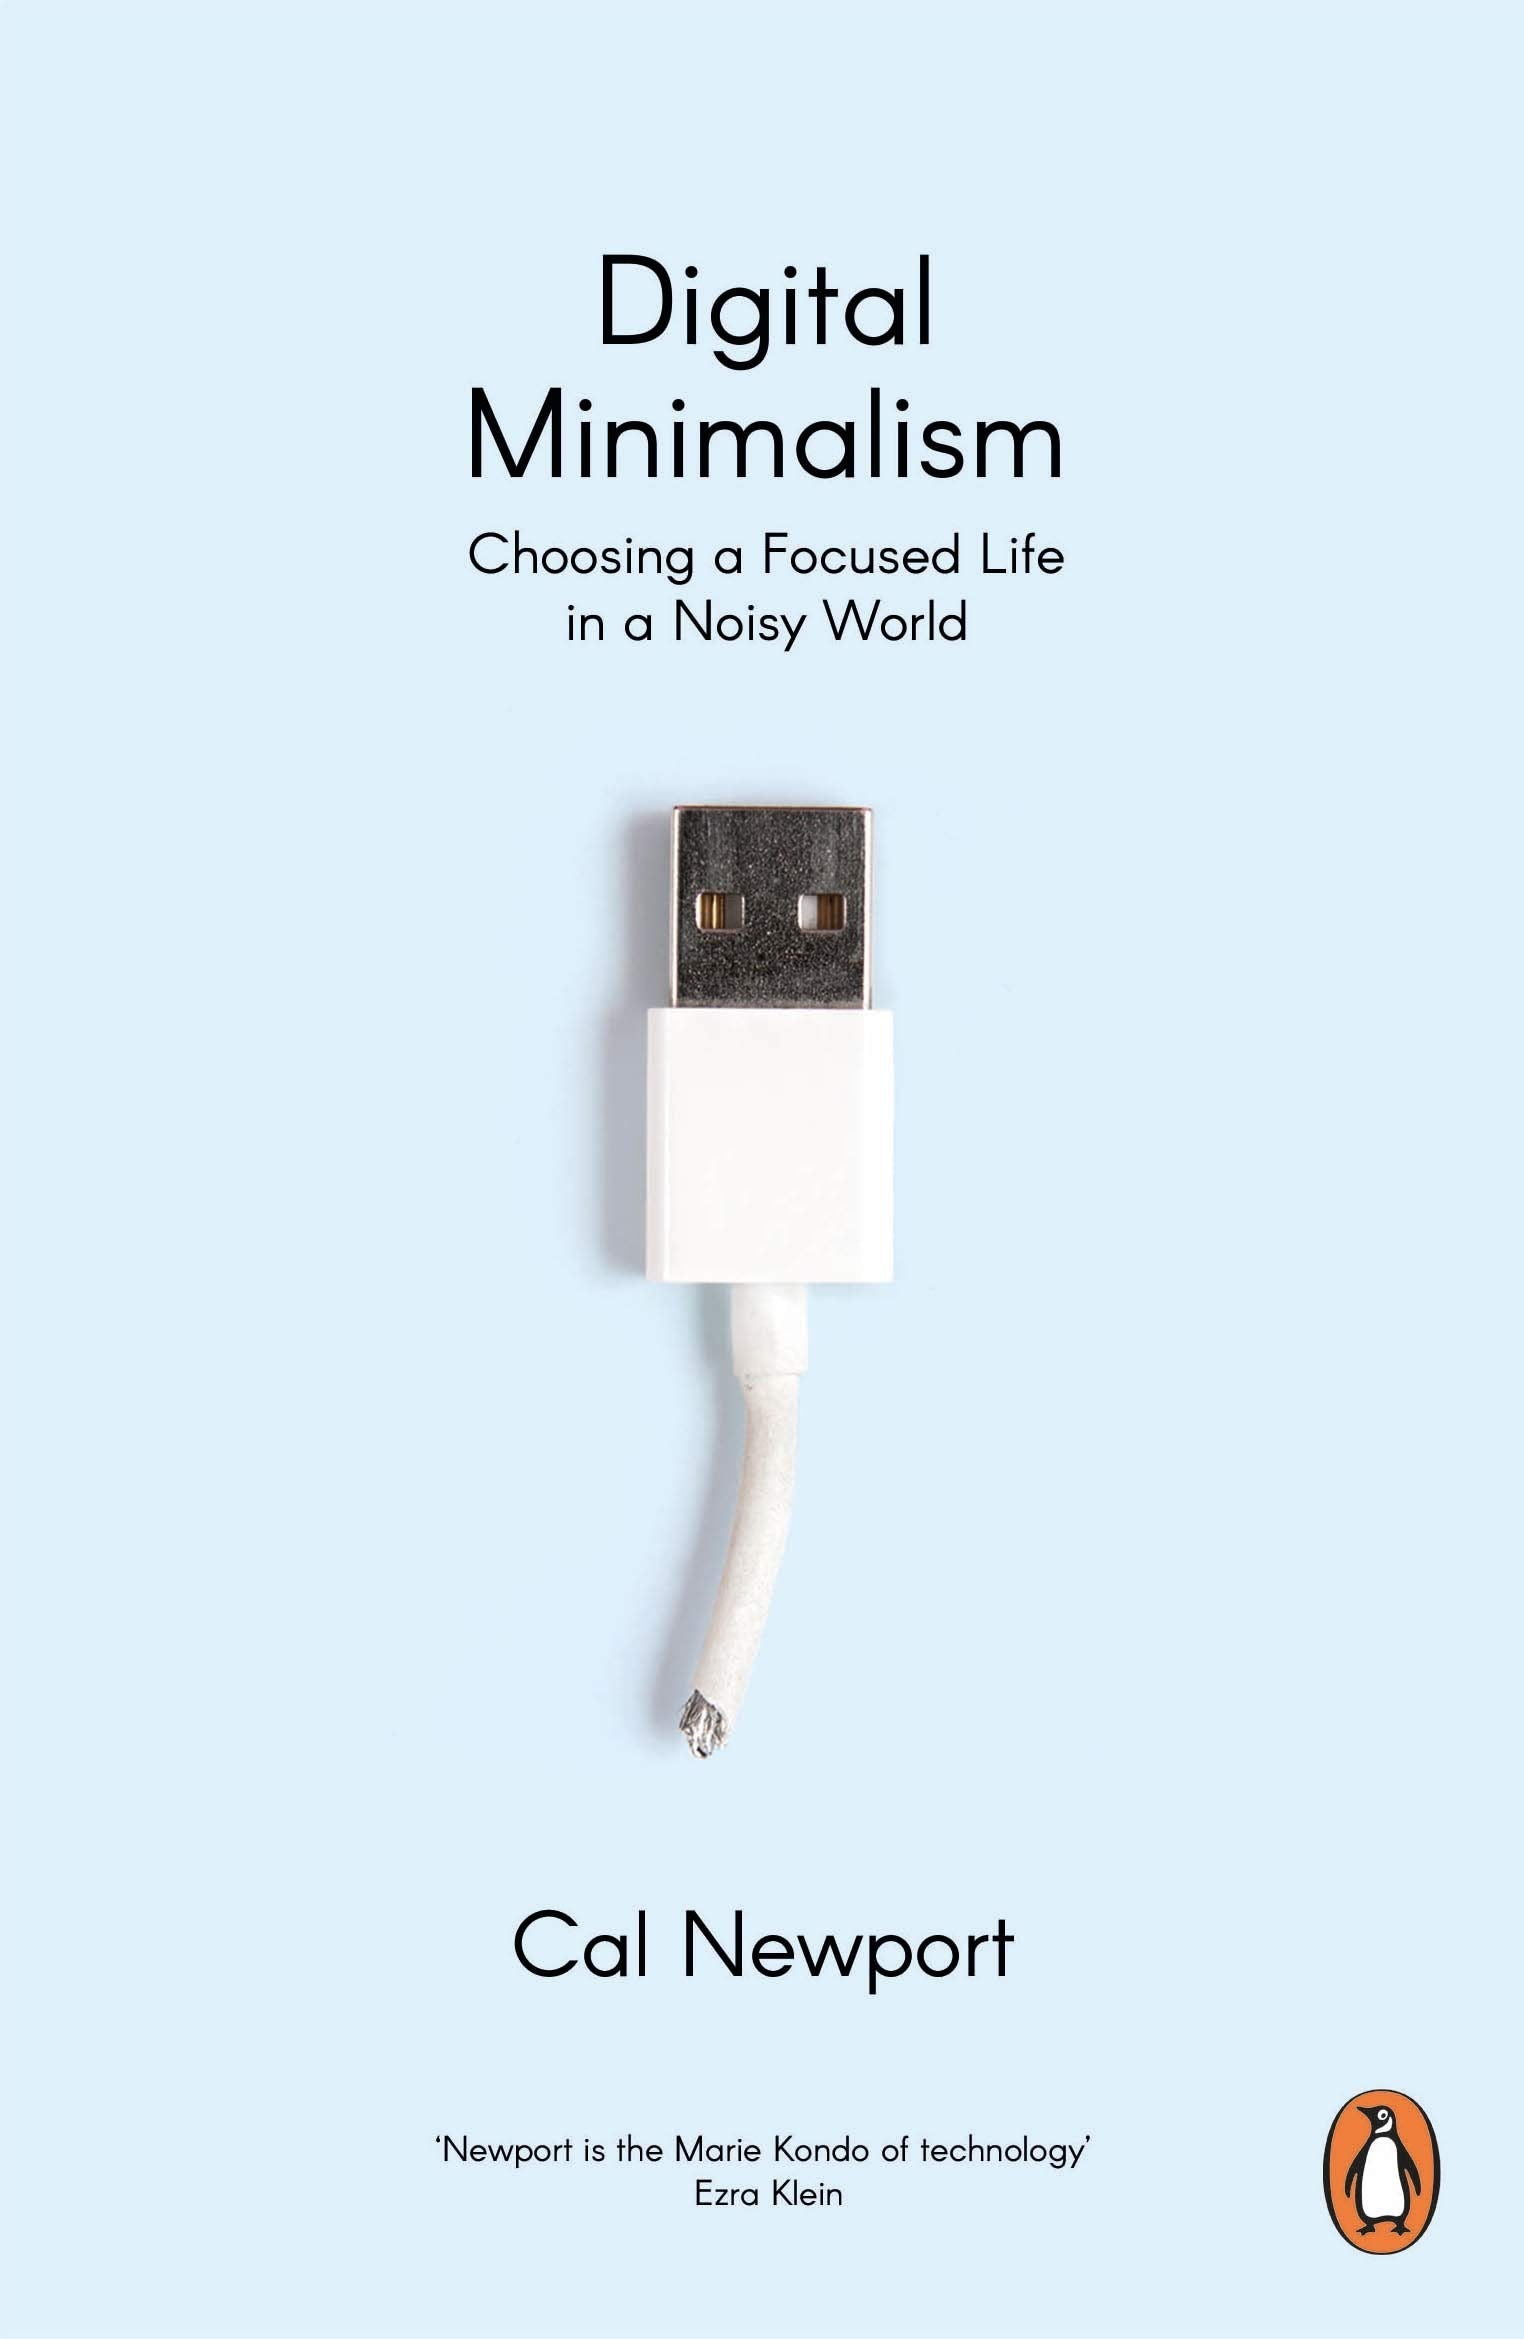 The cover of Digital Minimalism by Cal Newport